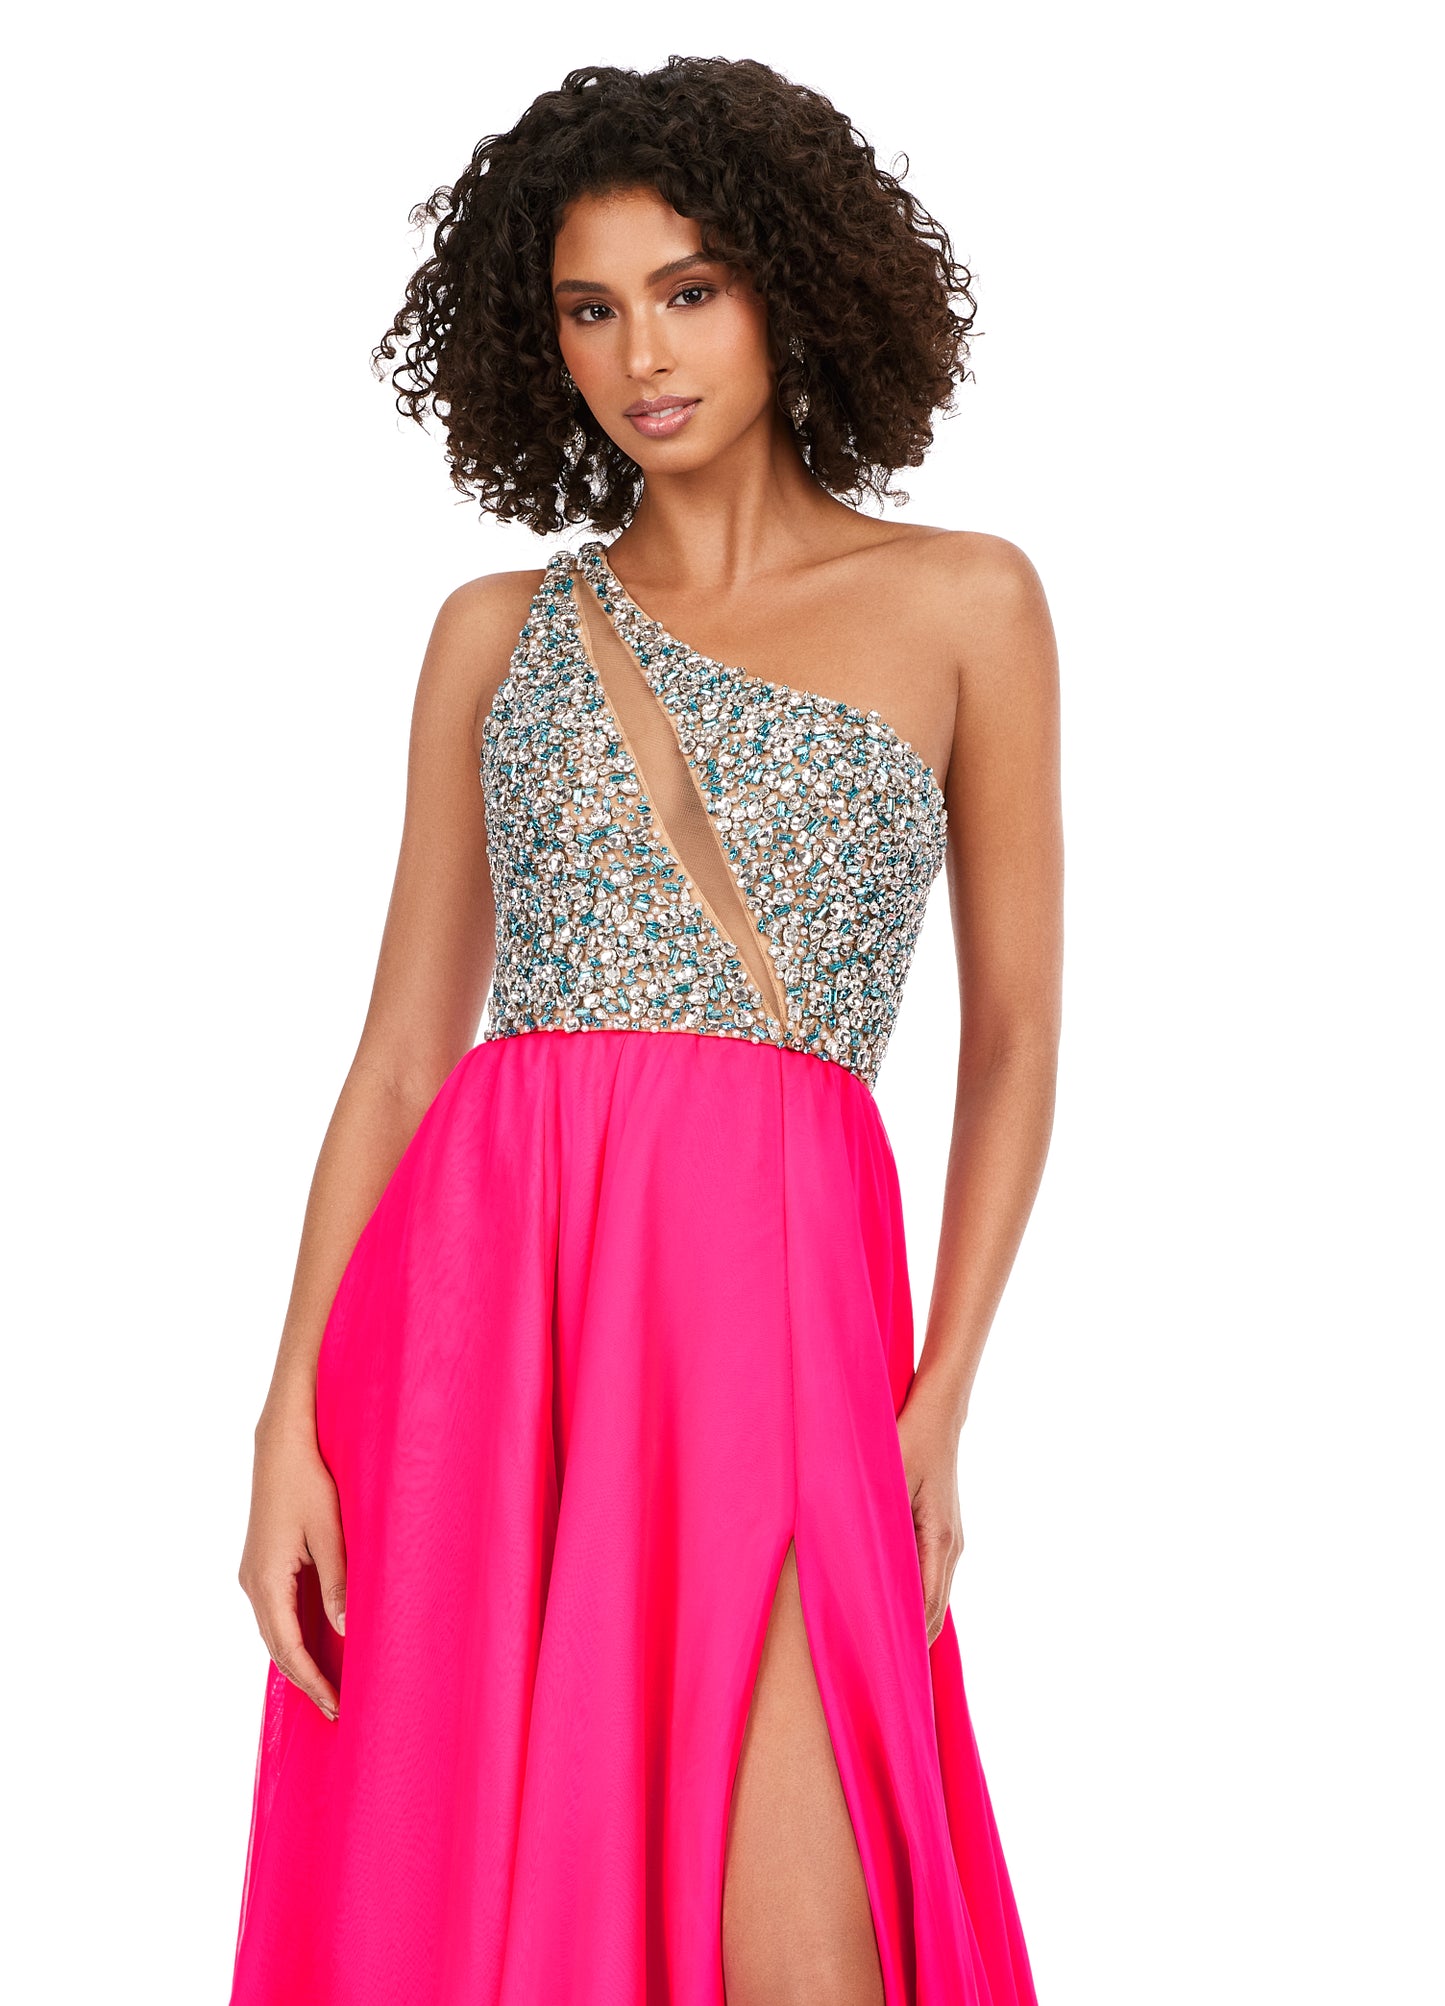 Ashley Lauren 11245 Chiffon Gown With Beaded Bustier A-Line Crystal Detail Prom Dress. Turn heads in this gorgeous chiffon gown featuring a combination of clear and turquoise beading on the bustier. The asymmetrical neckline is complete with an illusion cut out.